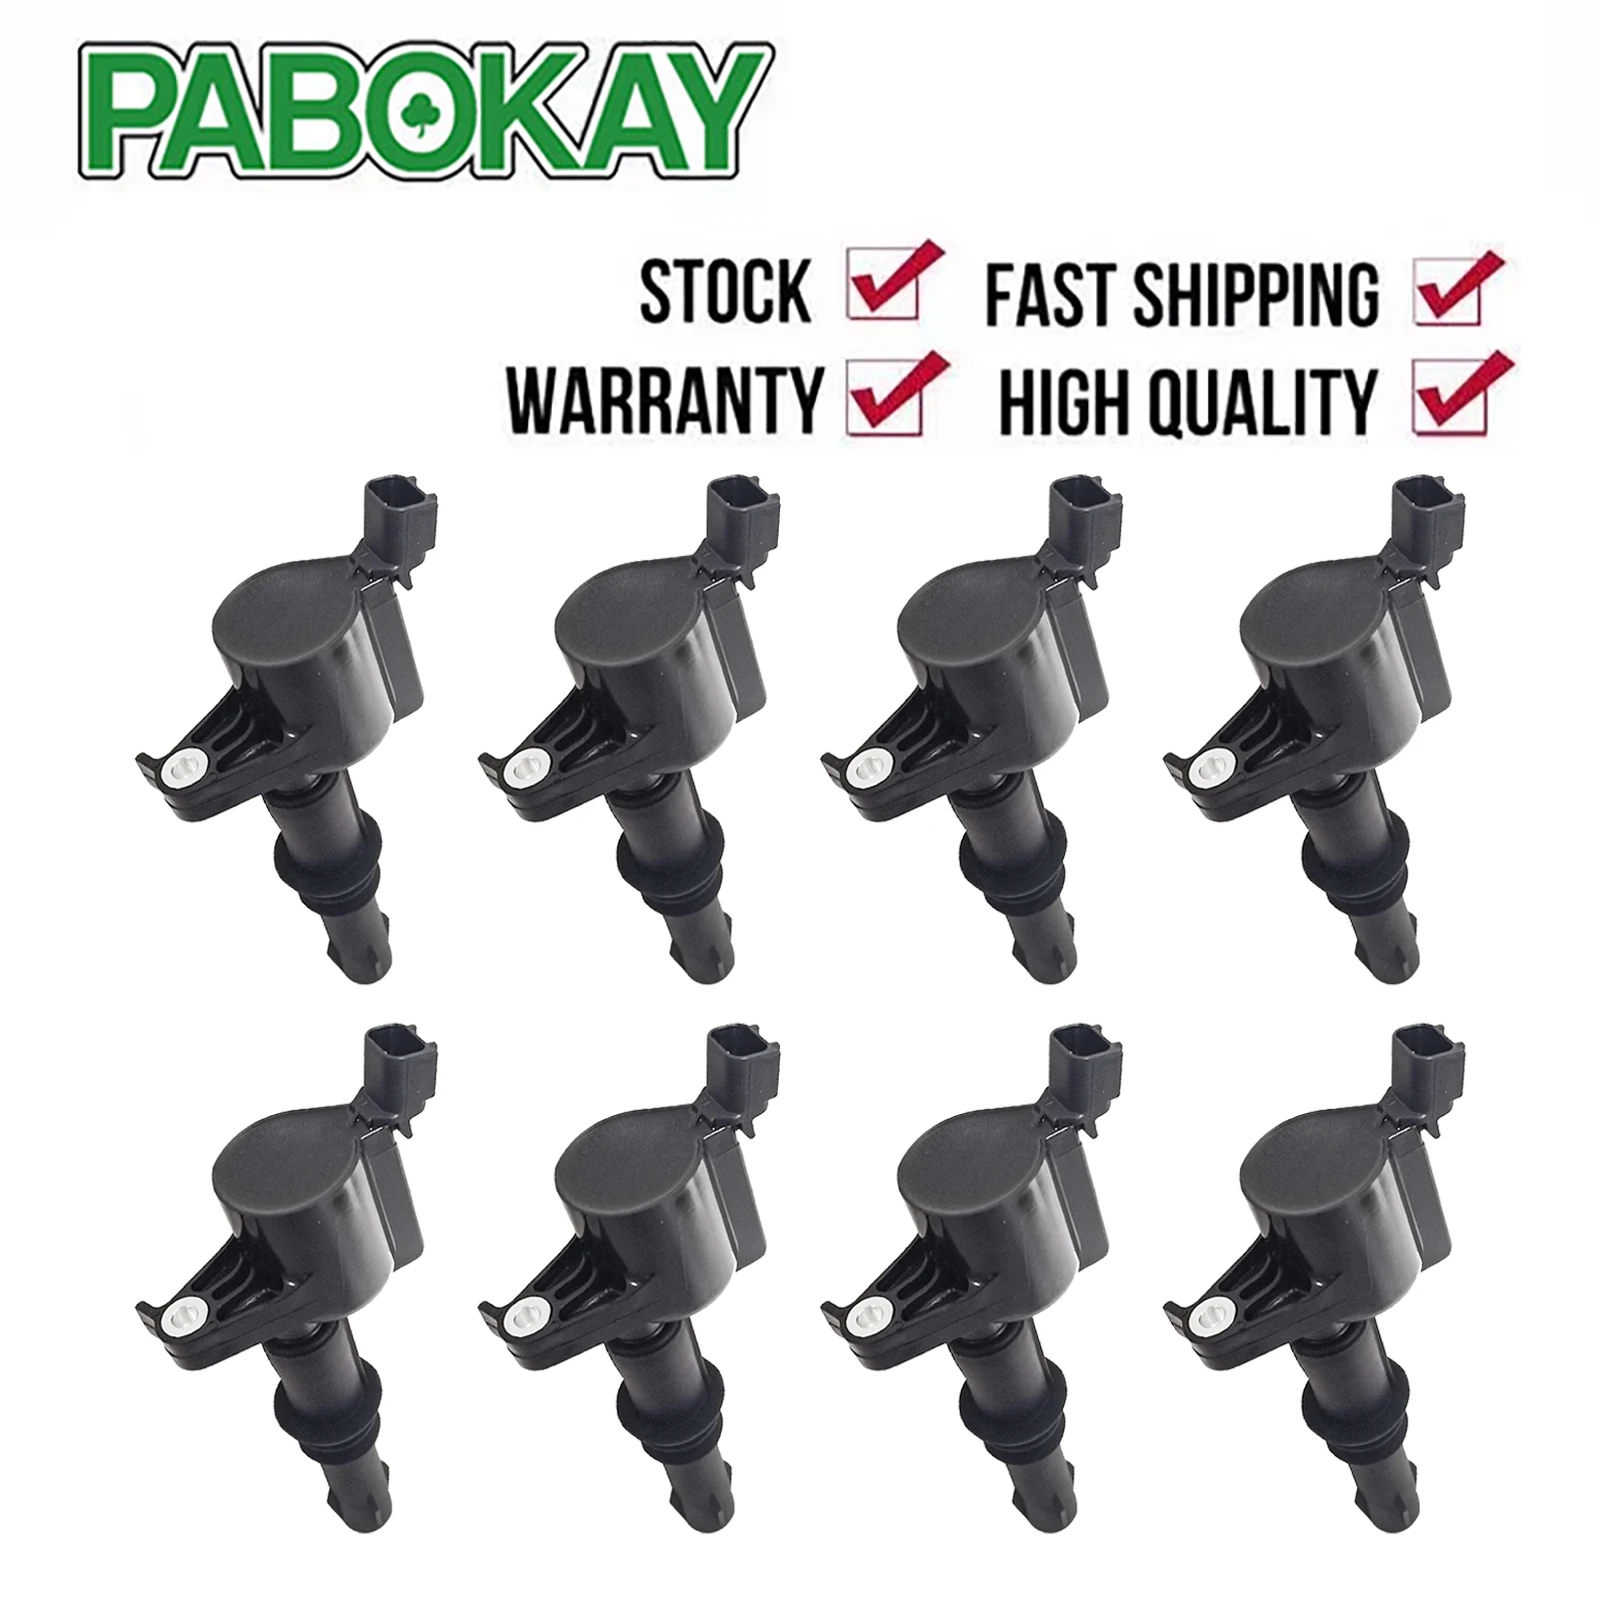 

8 PCS x Ignition Coils For Ford F150 Expedition DG511 DG-511 5C1584 FD508 UF537 3L3Z12029BA 3L3E12A366CA 3L3U-12A366-BB 11202934